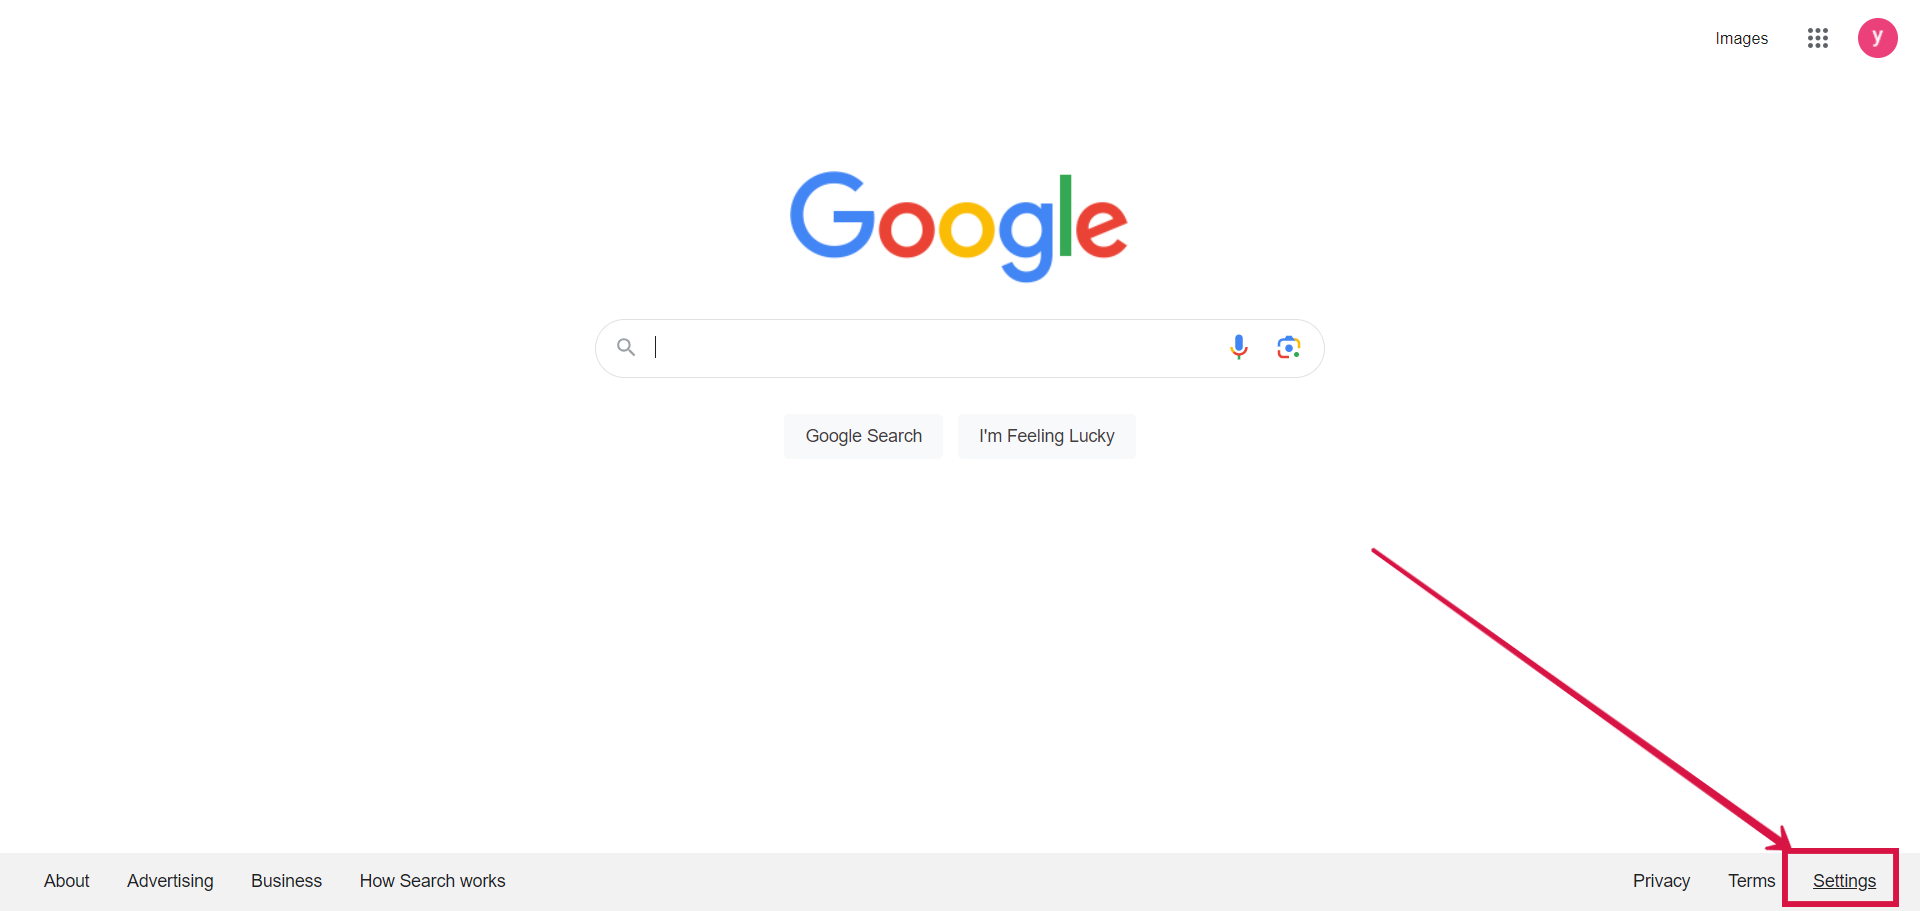 Visit Google Website And Click On The Settings Button In The Bottom Right Corner